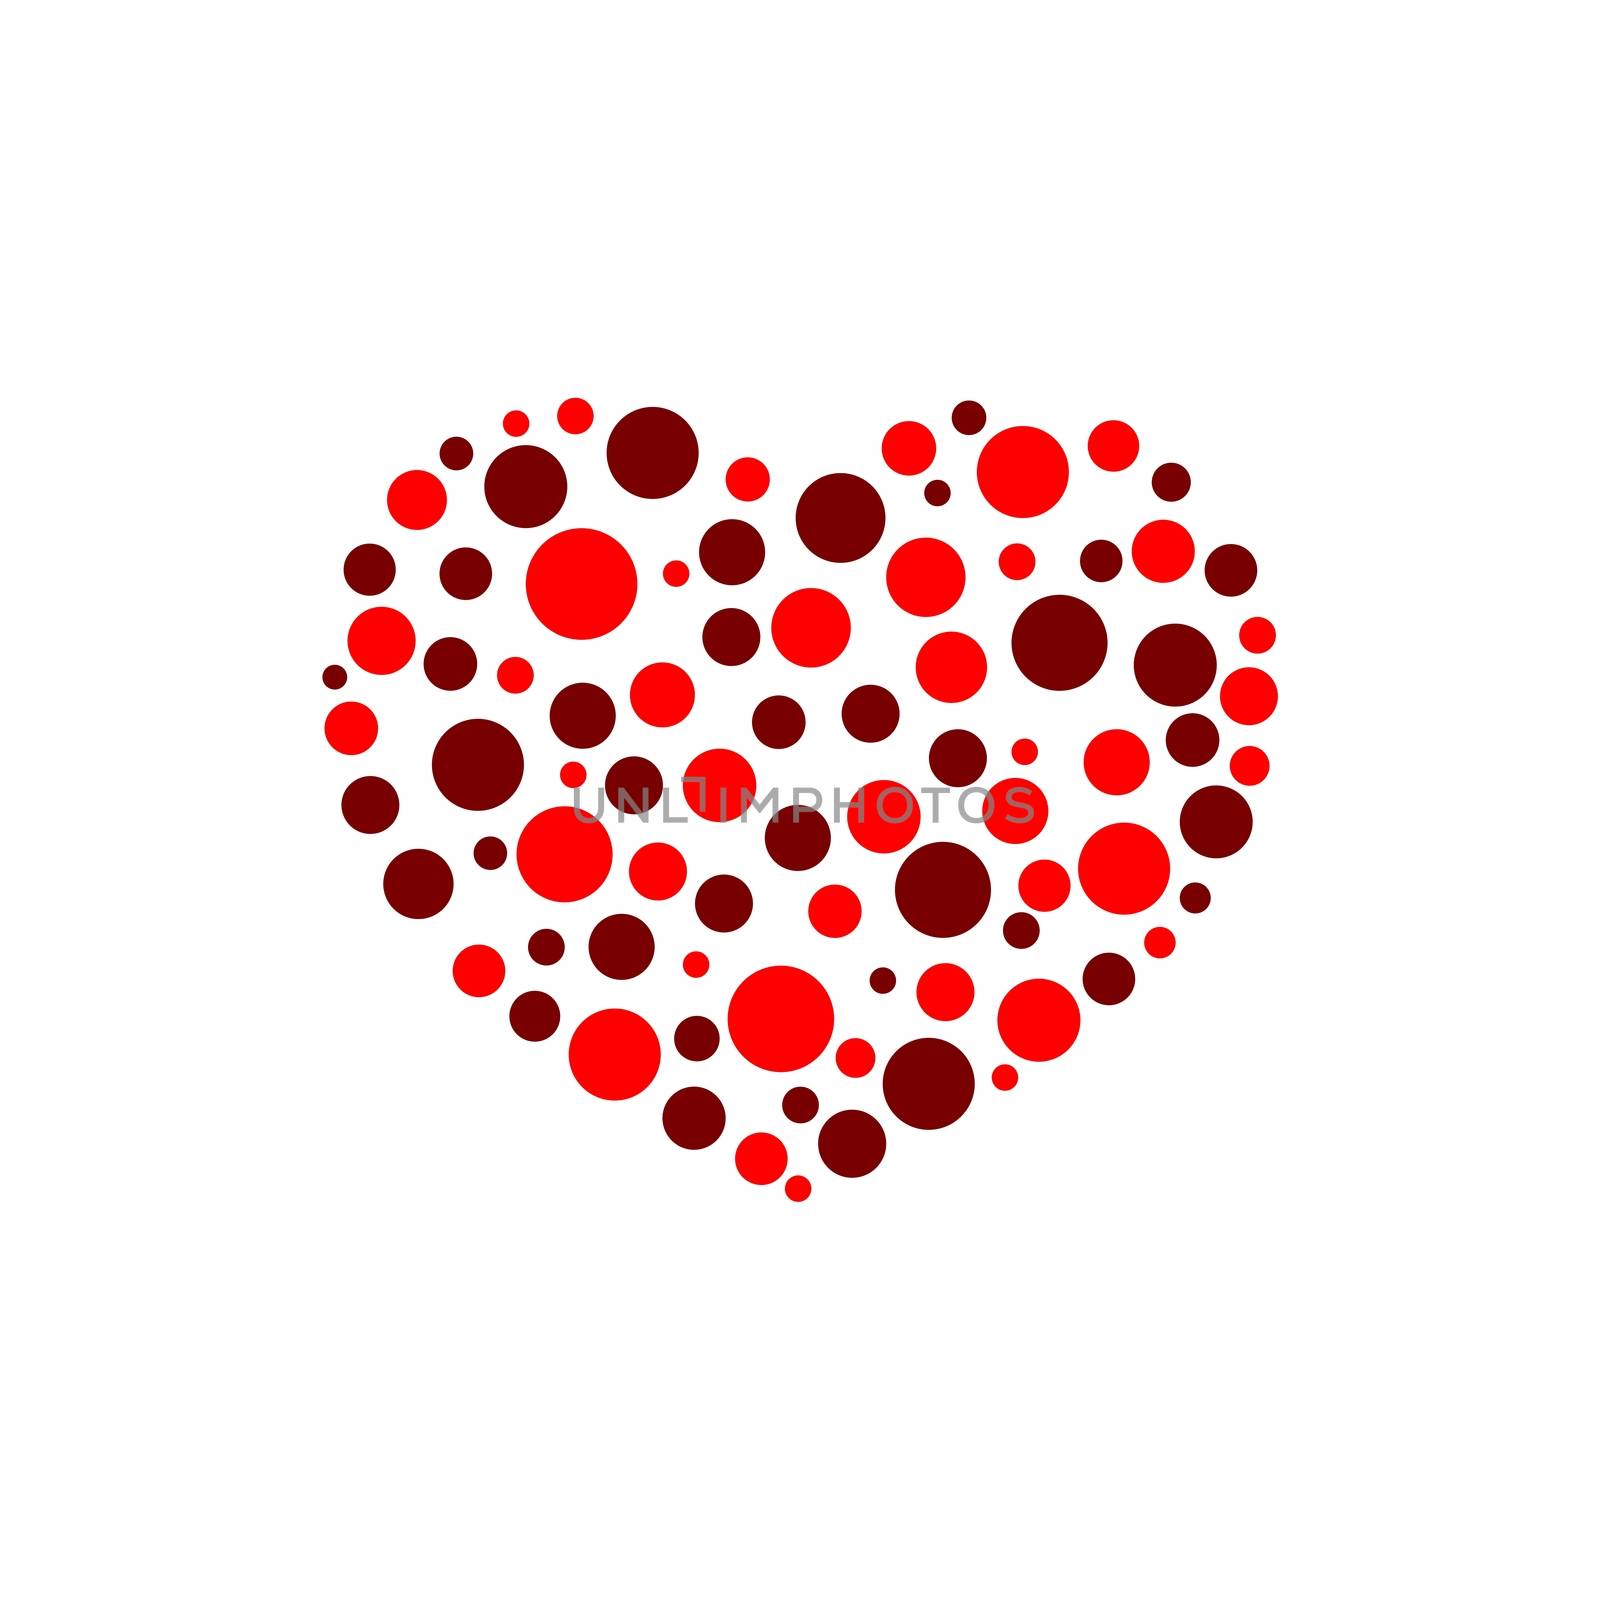 Red Dots Heart Shape Logo Template Illustration Design. Vector EPS 10. by soponyono1